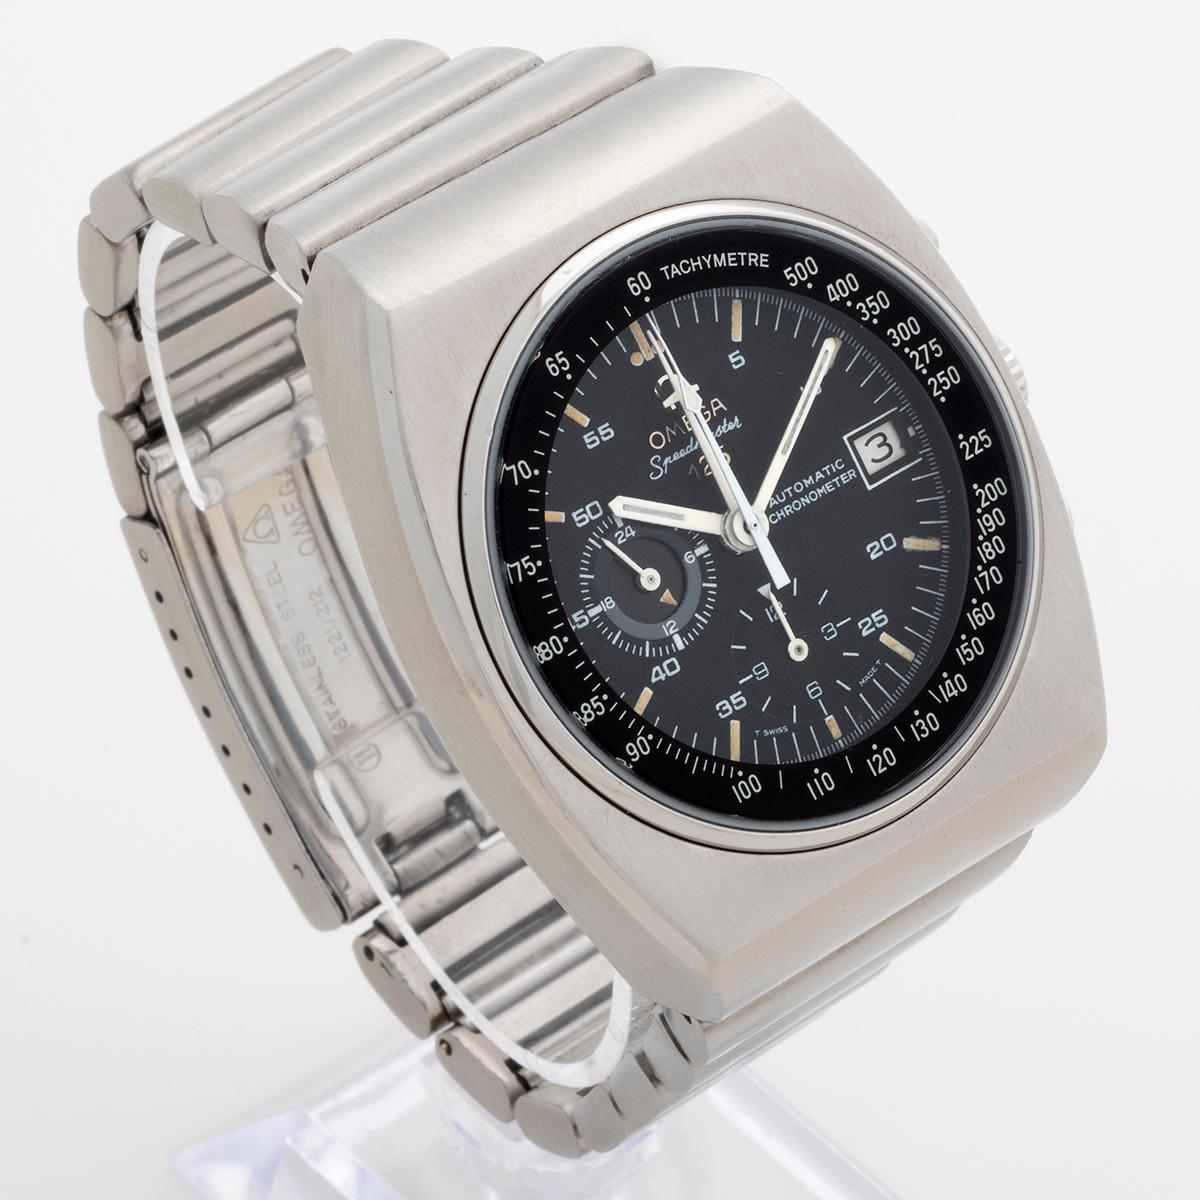 Celebrating 125 years of Omega in 1973, the Speedmaster 125 was the world's first chronometer certified chronograph with automatic movement and date (cal 1041 movement). A technologically advanced watch, the Speedmaster 125 had a price tag almost